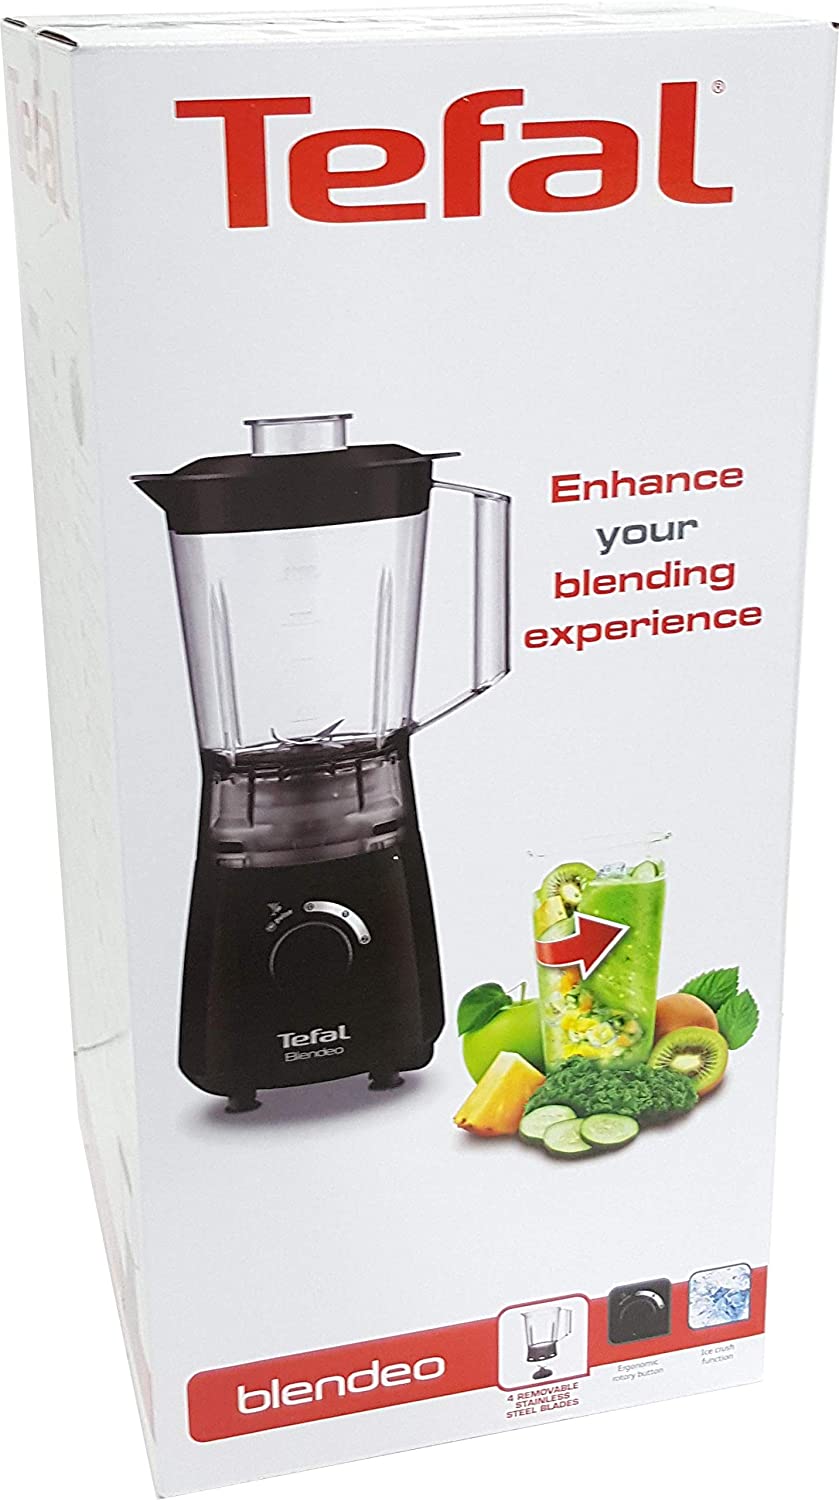 Tefal Blendeo BL2A, 400W, 1.5L, Stand Blender, Smoothie Maker, Mixer, Shakes Blender, Mill and Icebreaker, Ice Crusher with 2 Speed Control